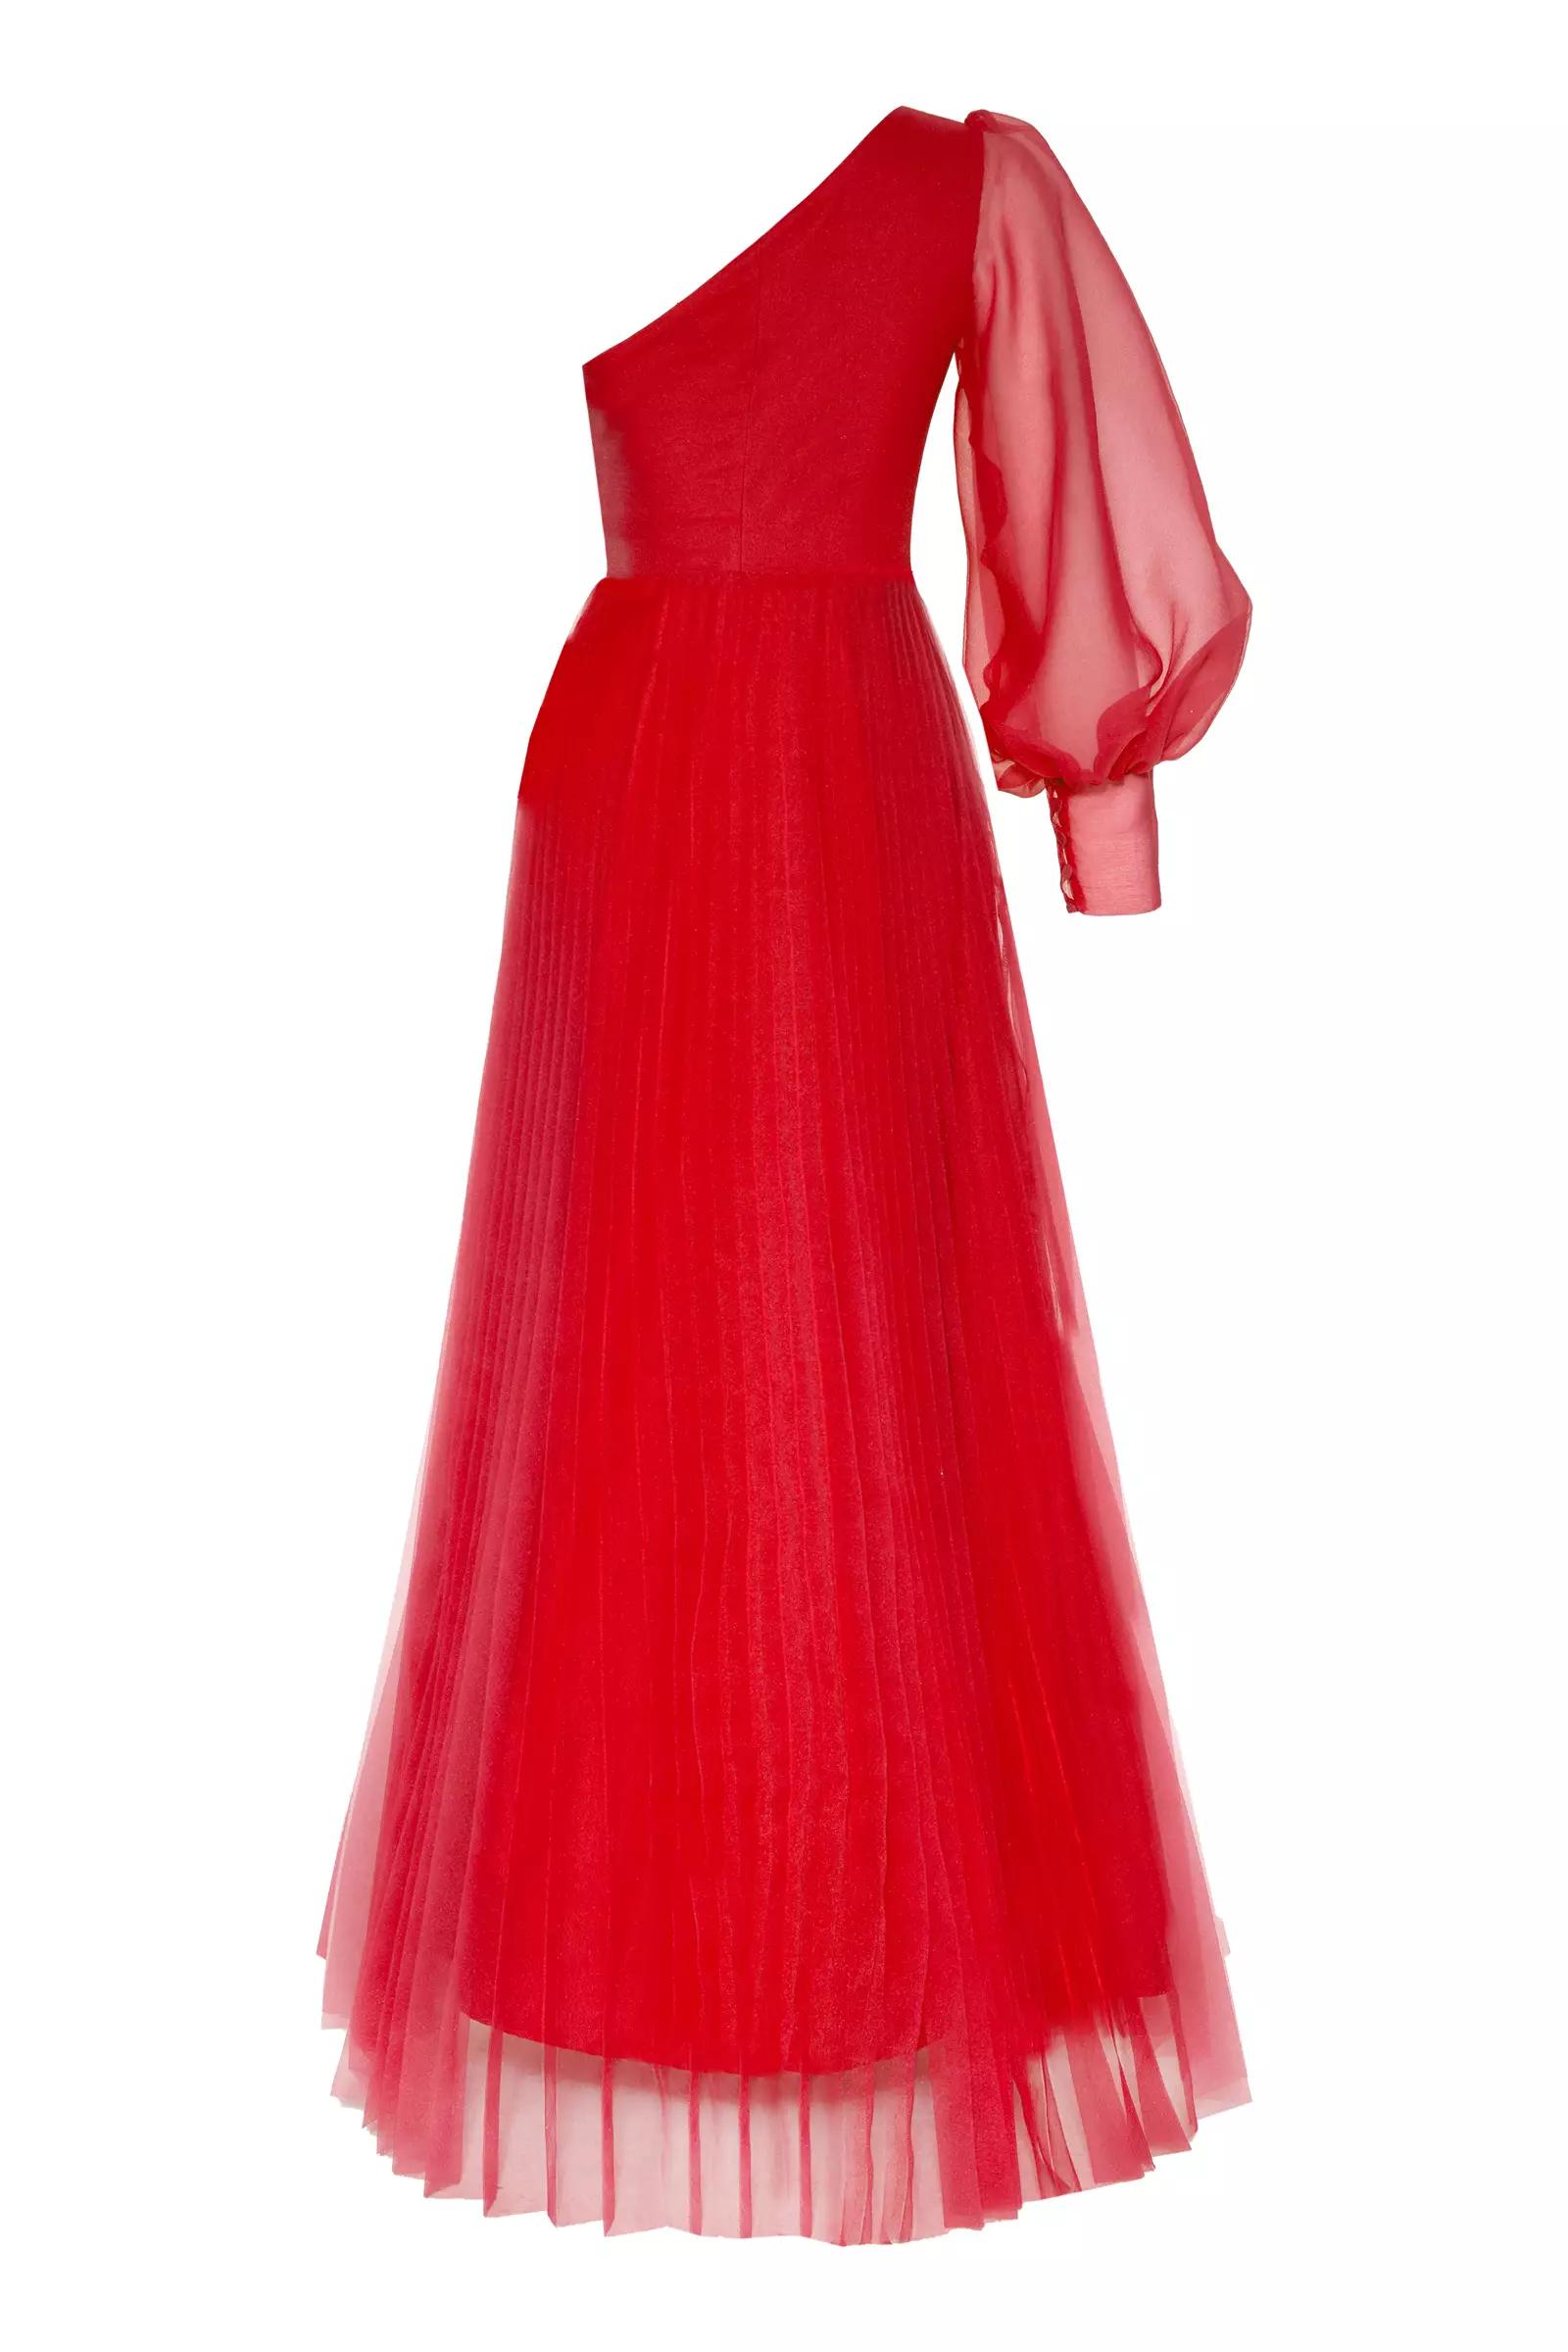 Red tulle one arm long dress